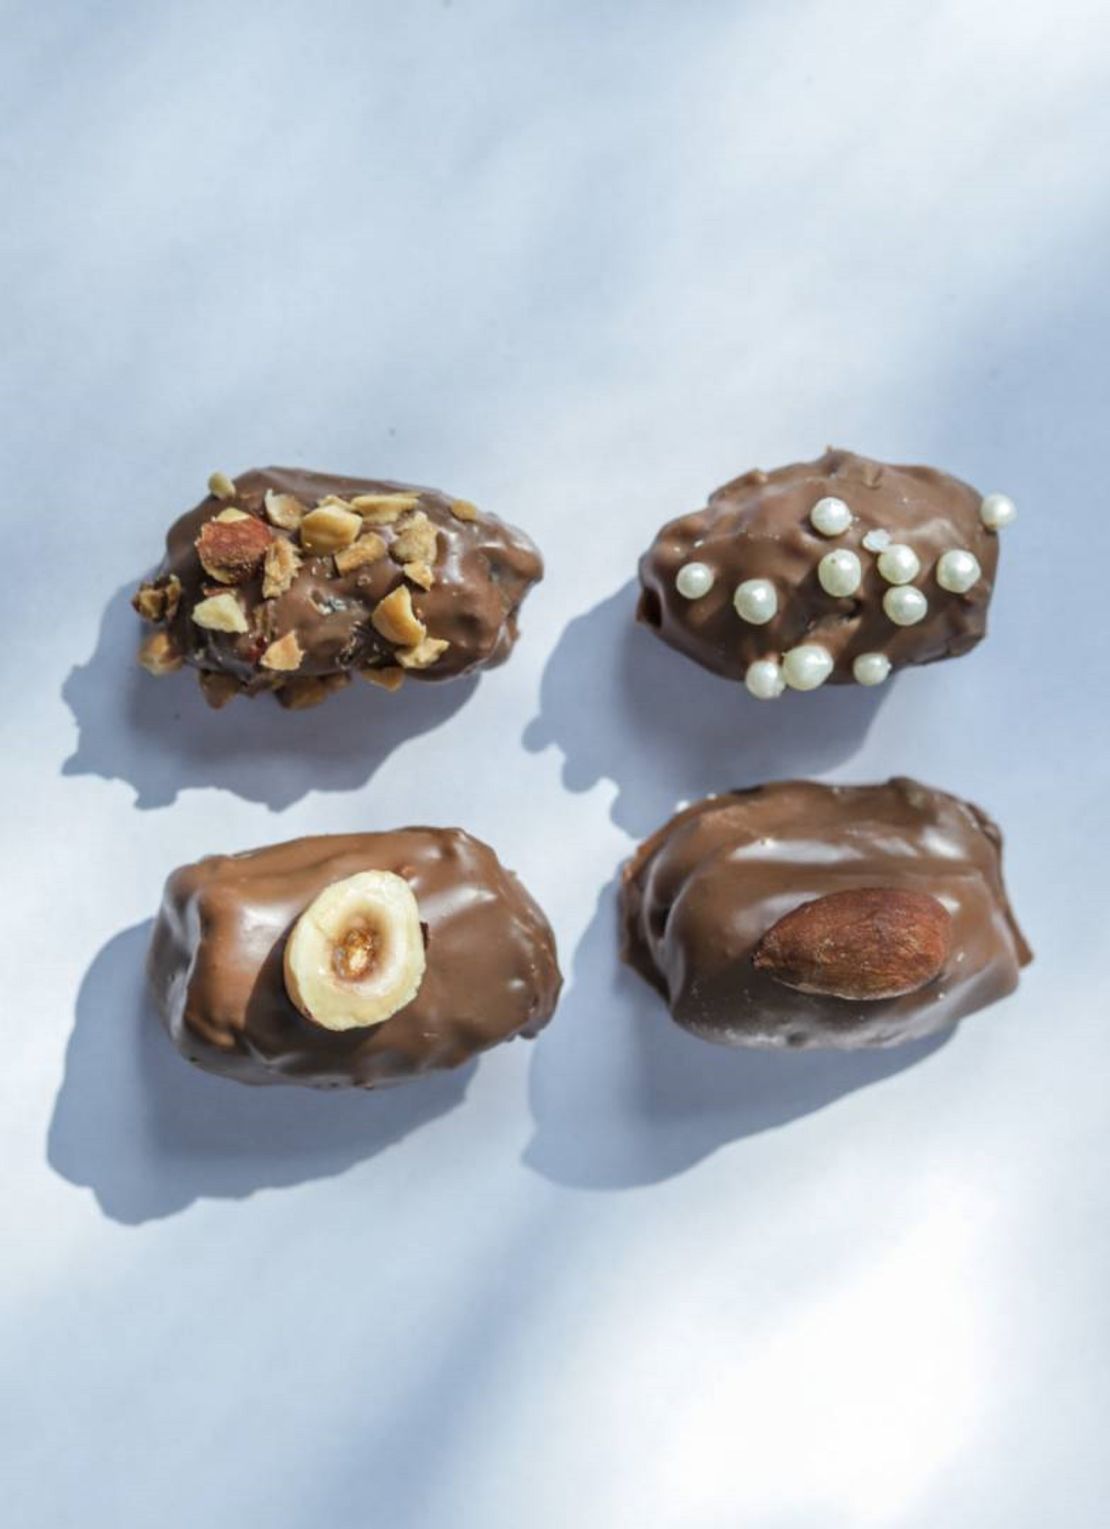 Chocolate-covered dates available to order on Yummy